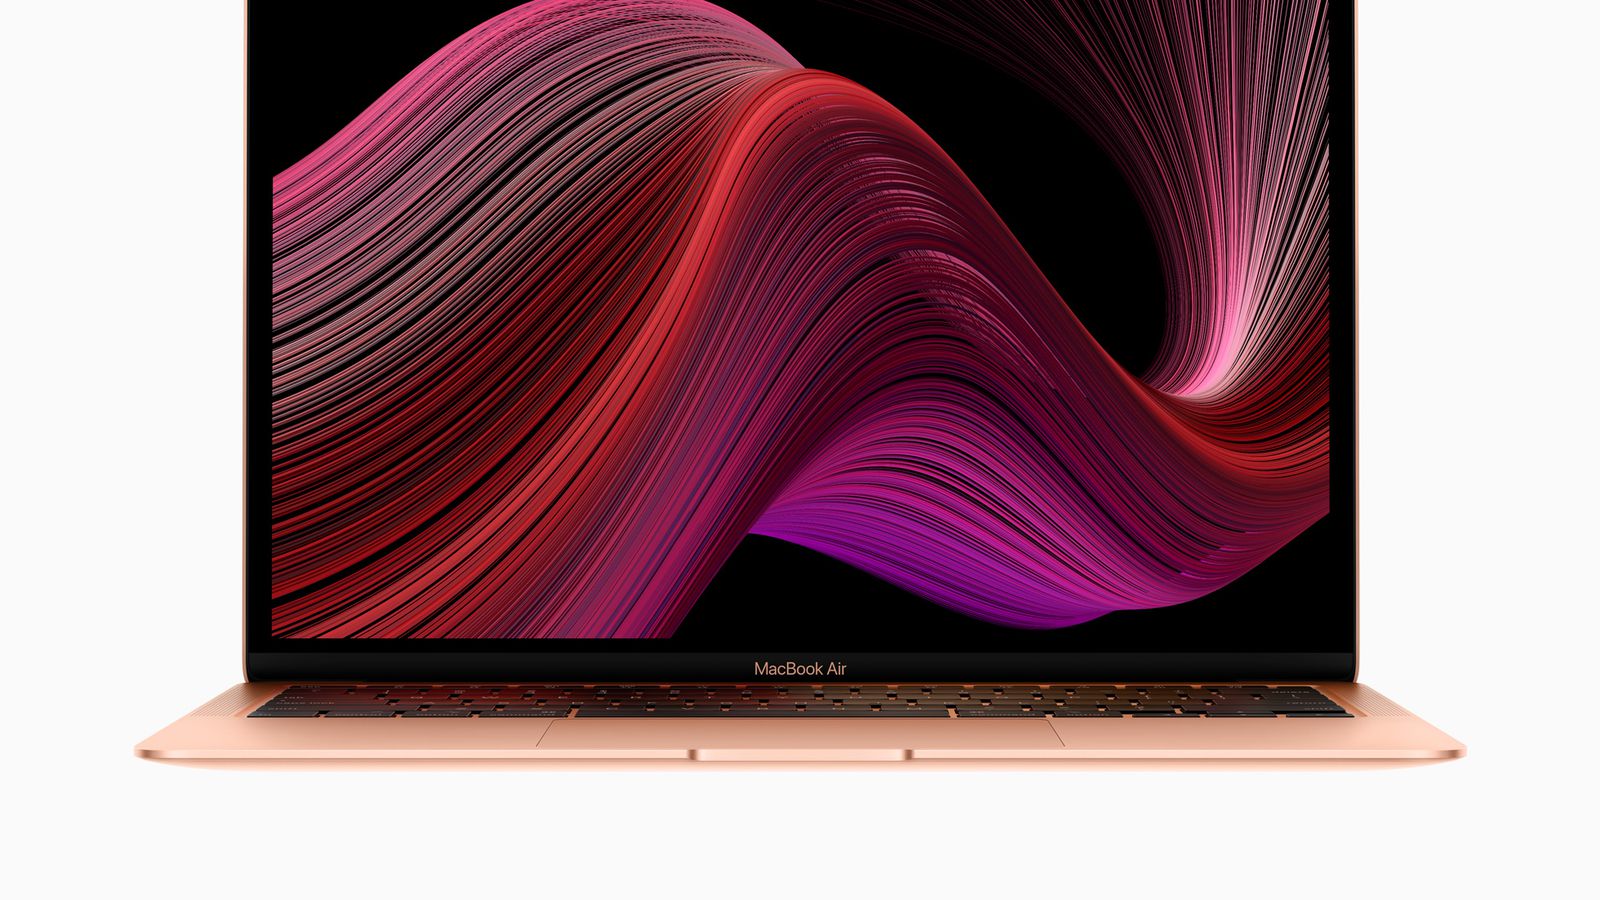 New MacBook Air Announced With Magic Keyboard, Up to 2x Faster 